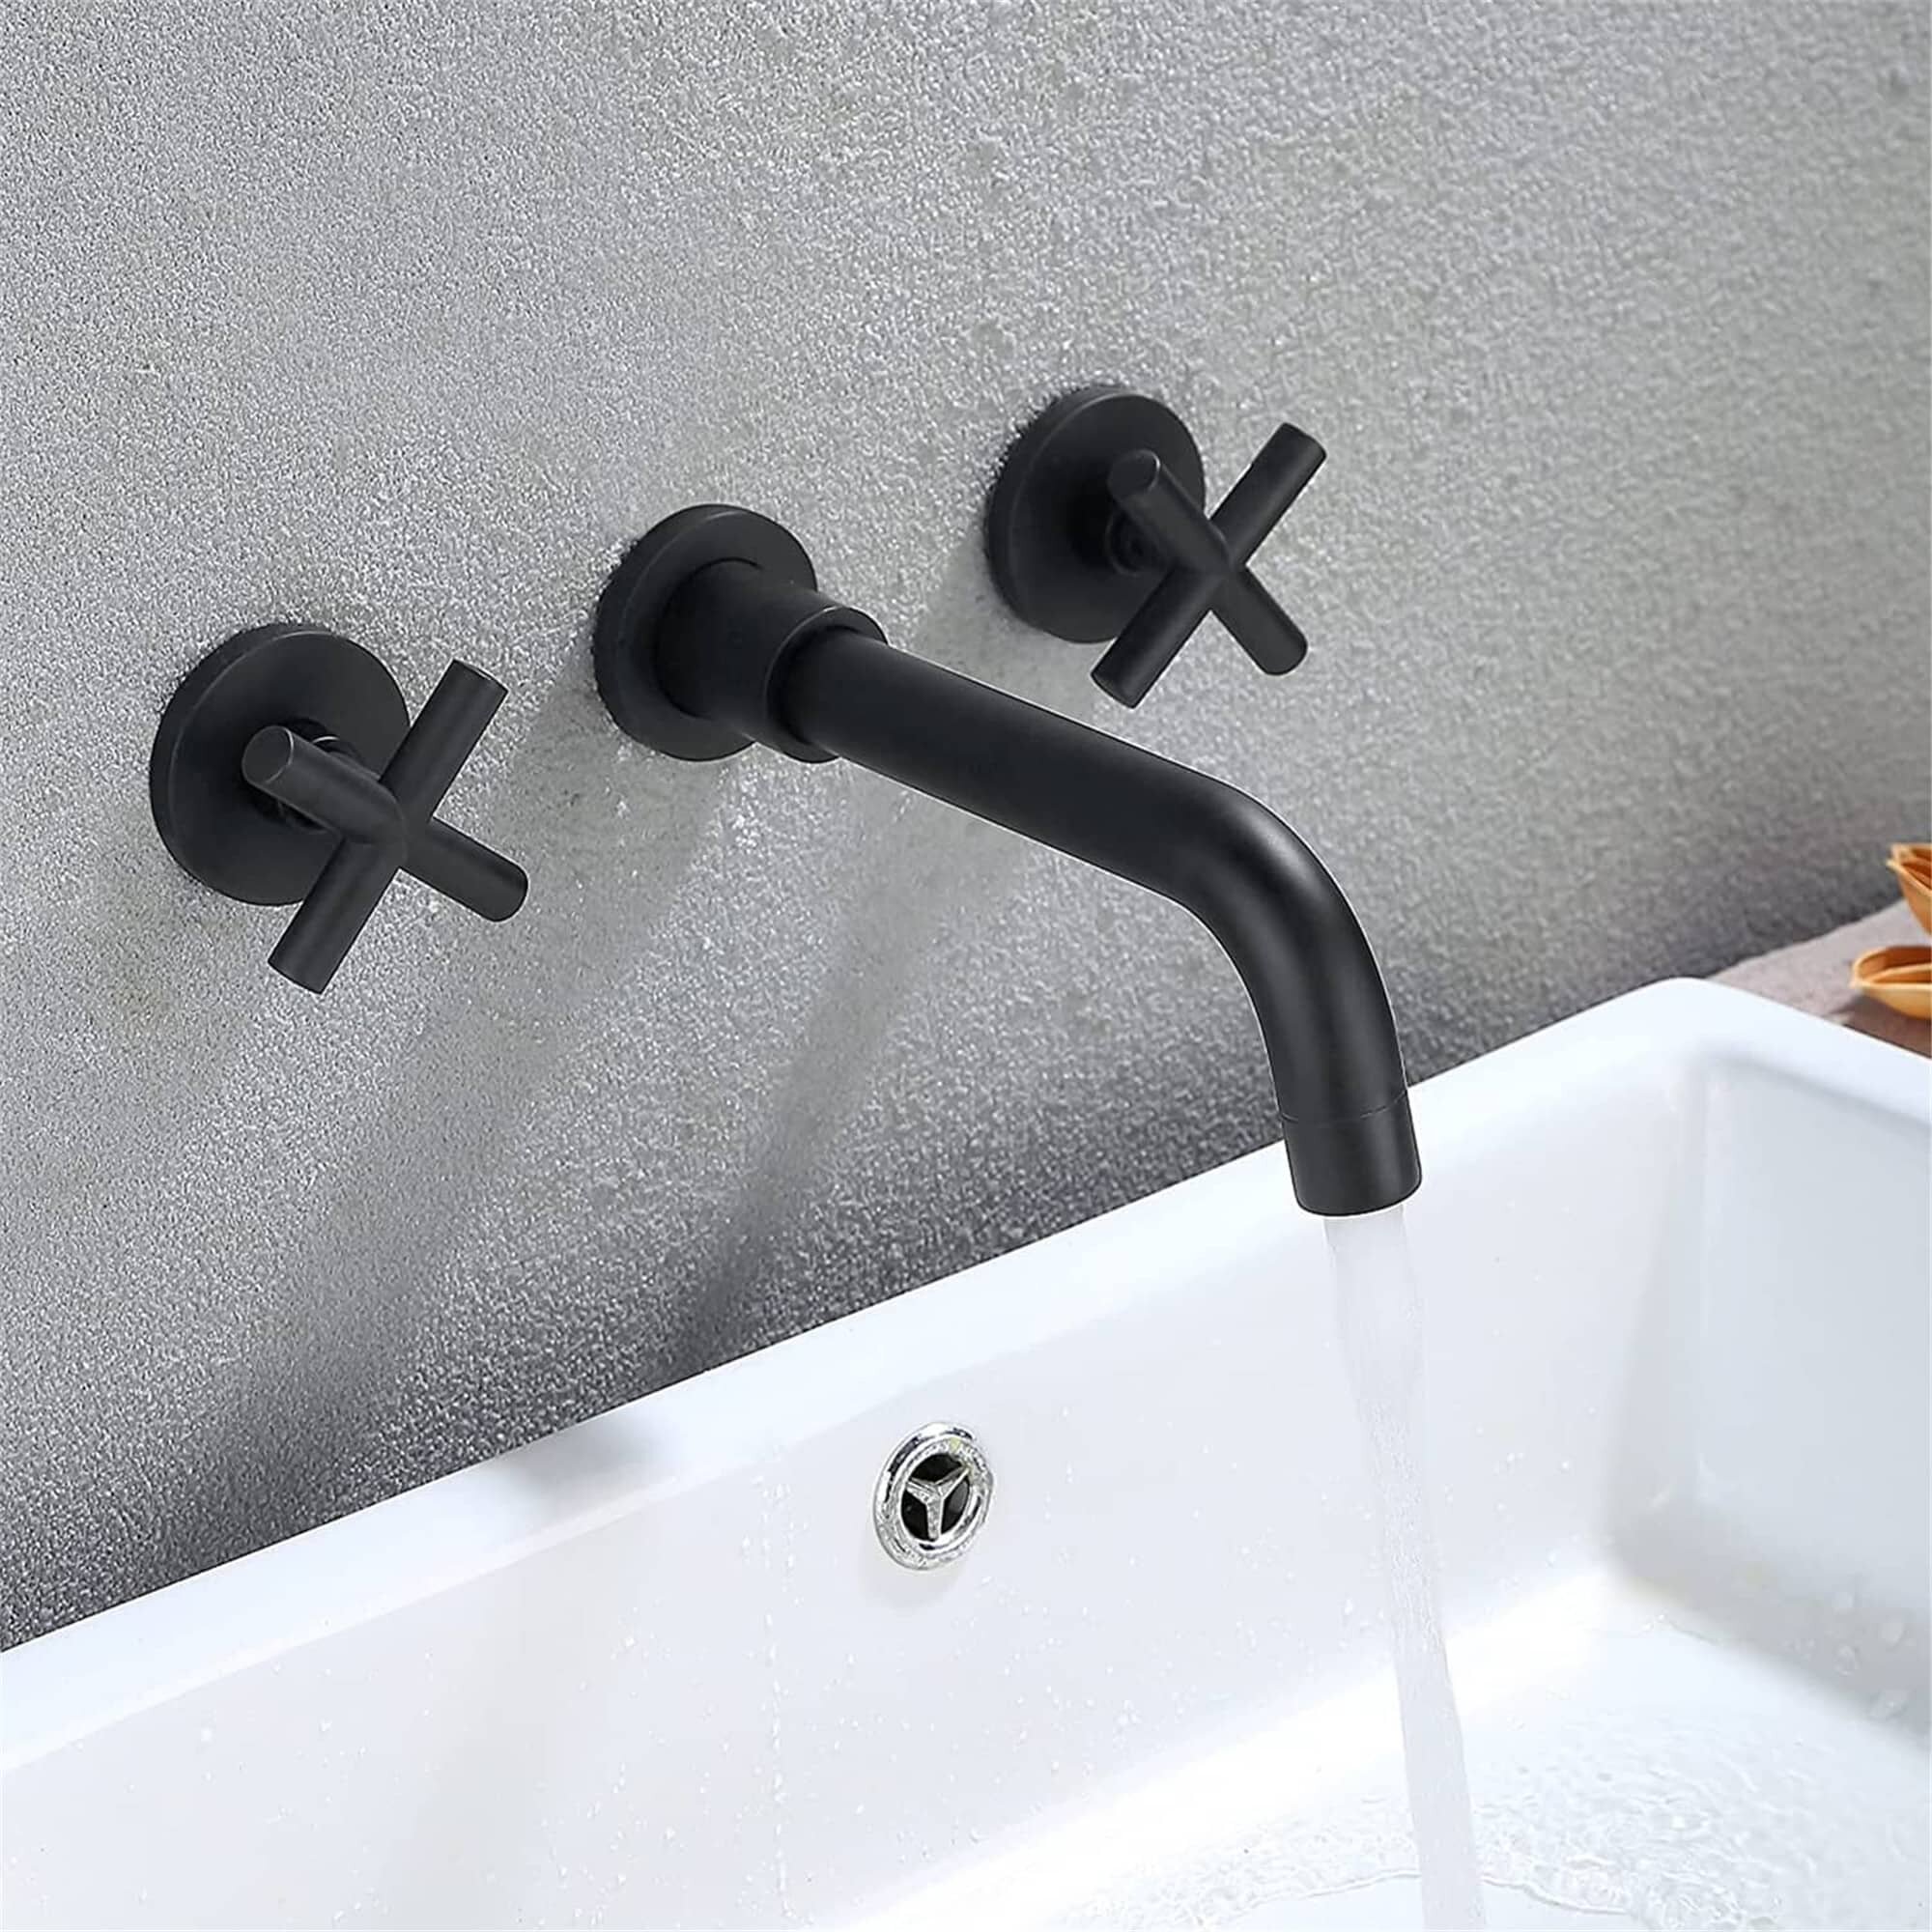 Kelelife Wall-Mounted Matte Black Mixer Tap with Waterfall Spout Suitable for Bathroom Sink Basin Decorative Cover Included